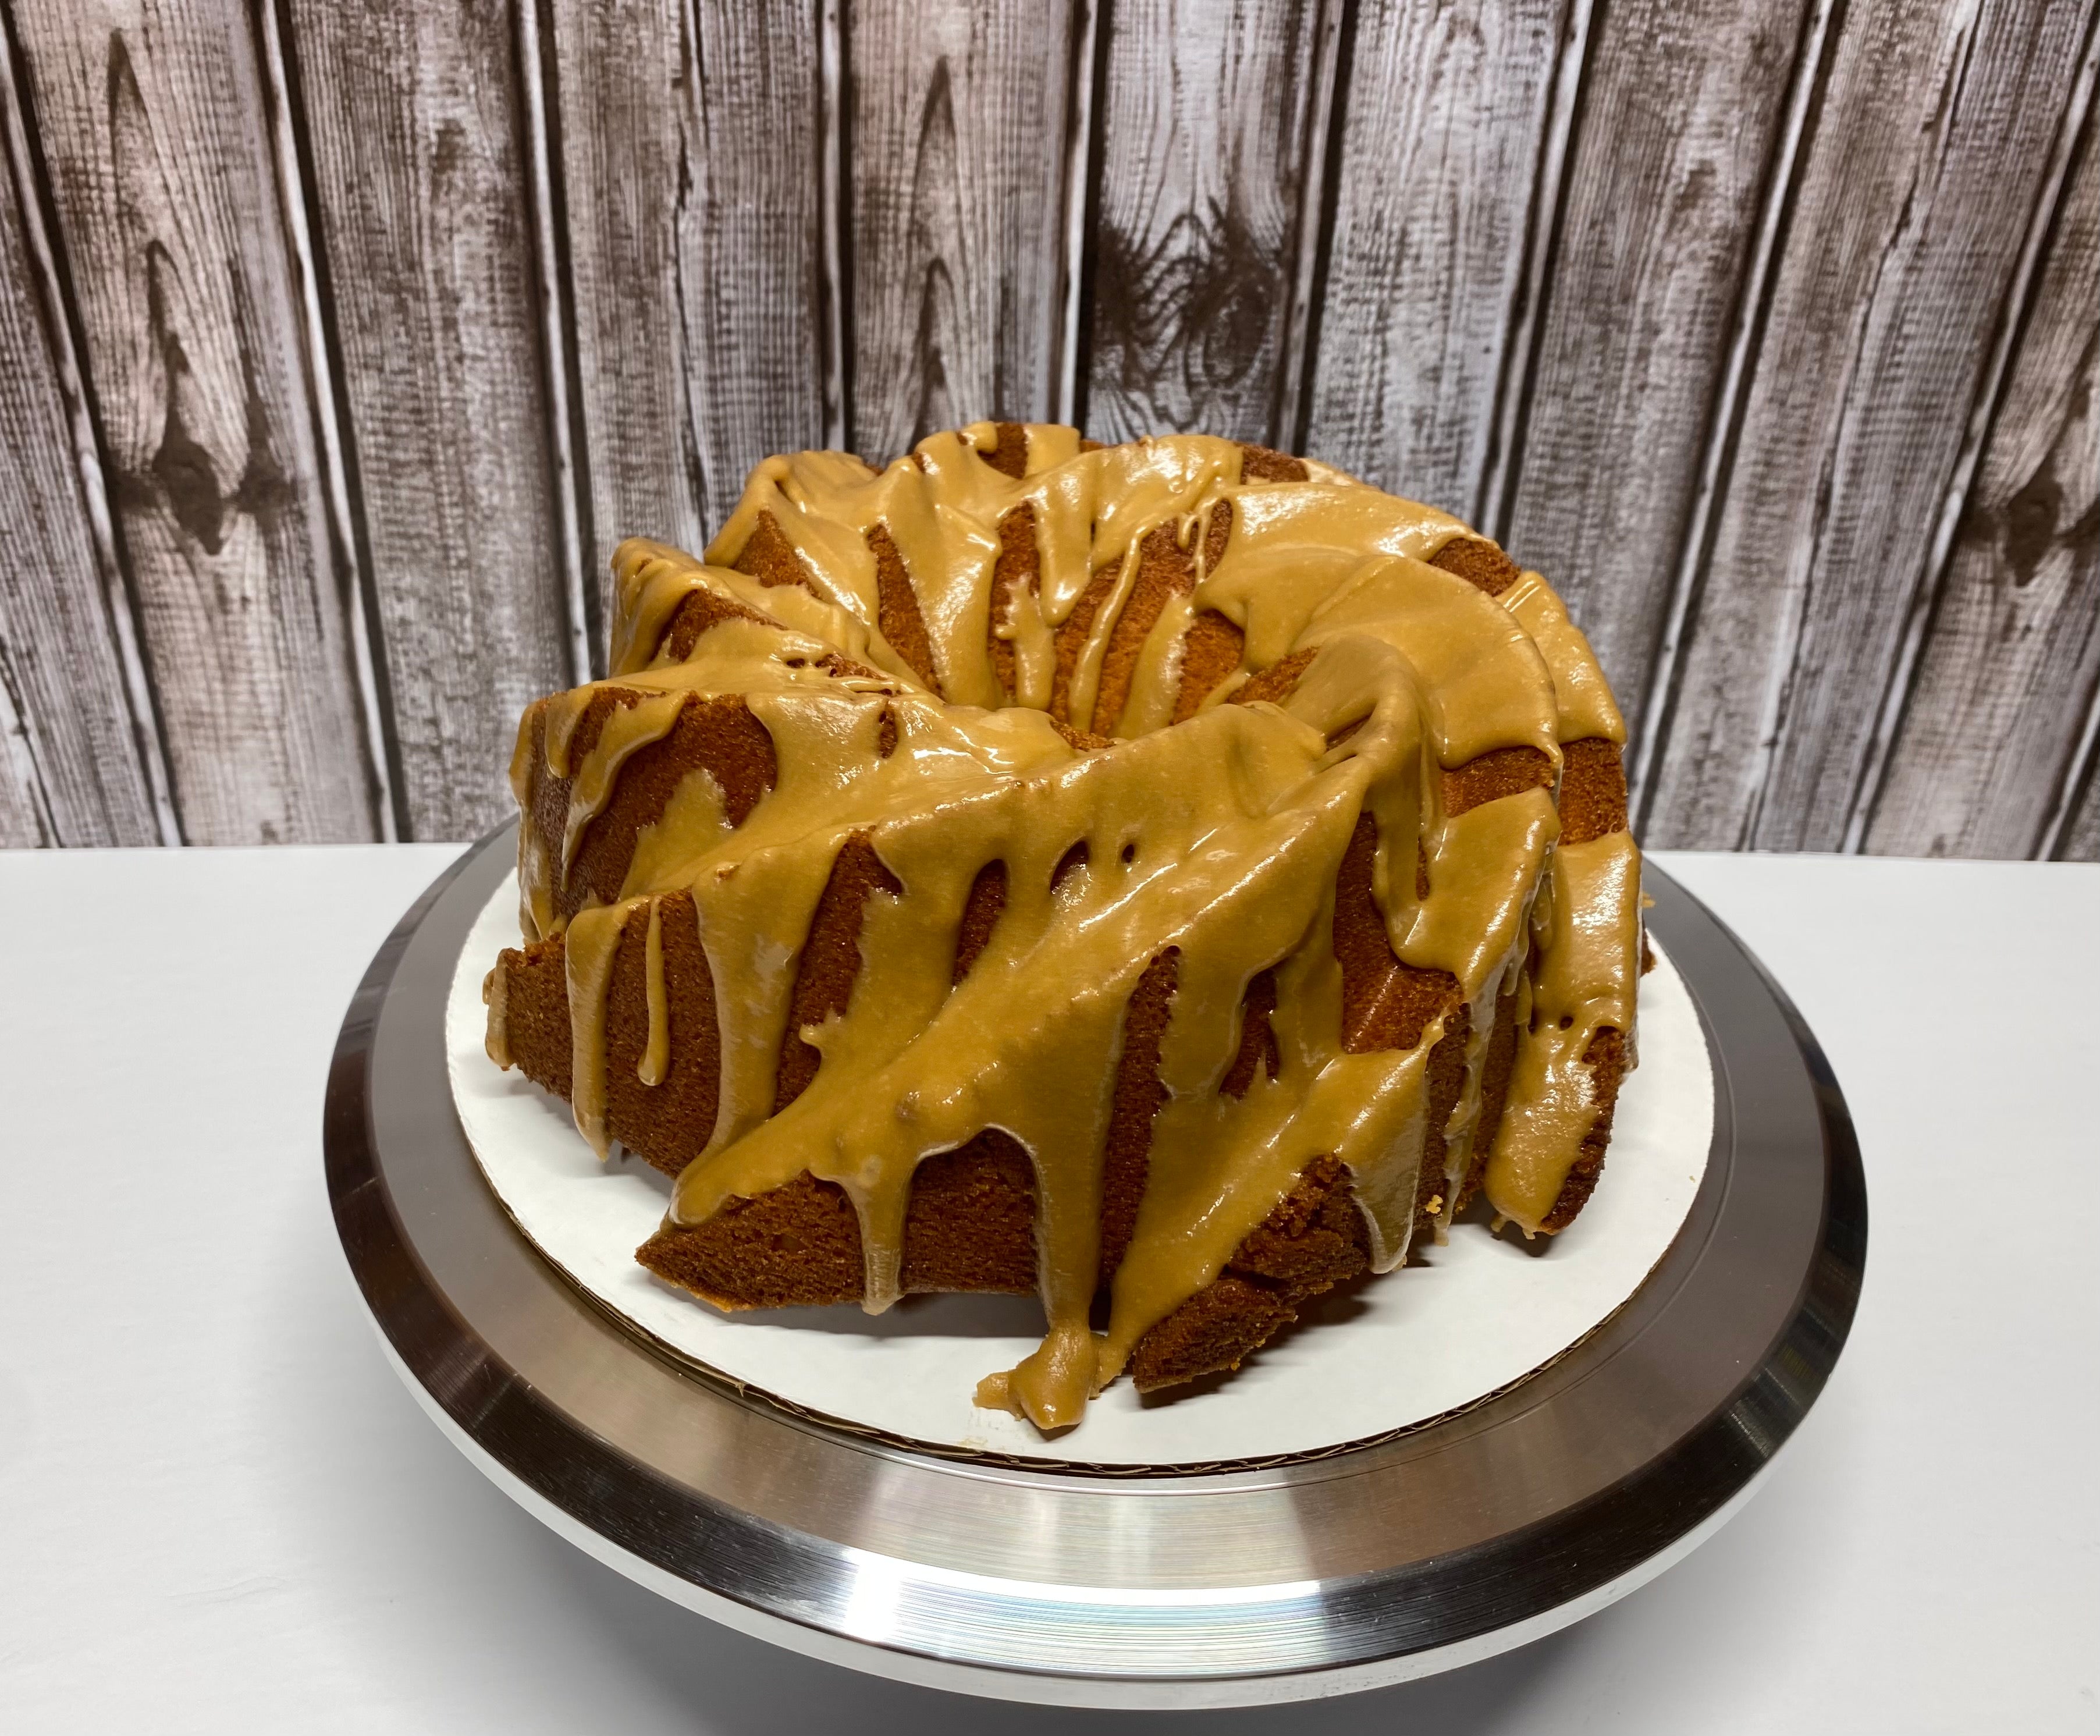 J Dub's Mini Pound Cakes (with toffee and pecans) - JDUBBYDESIGN™